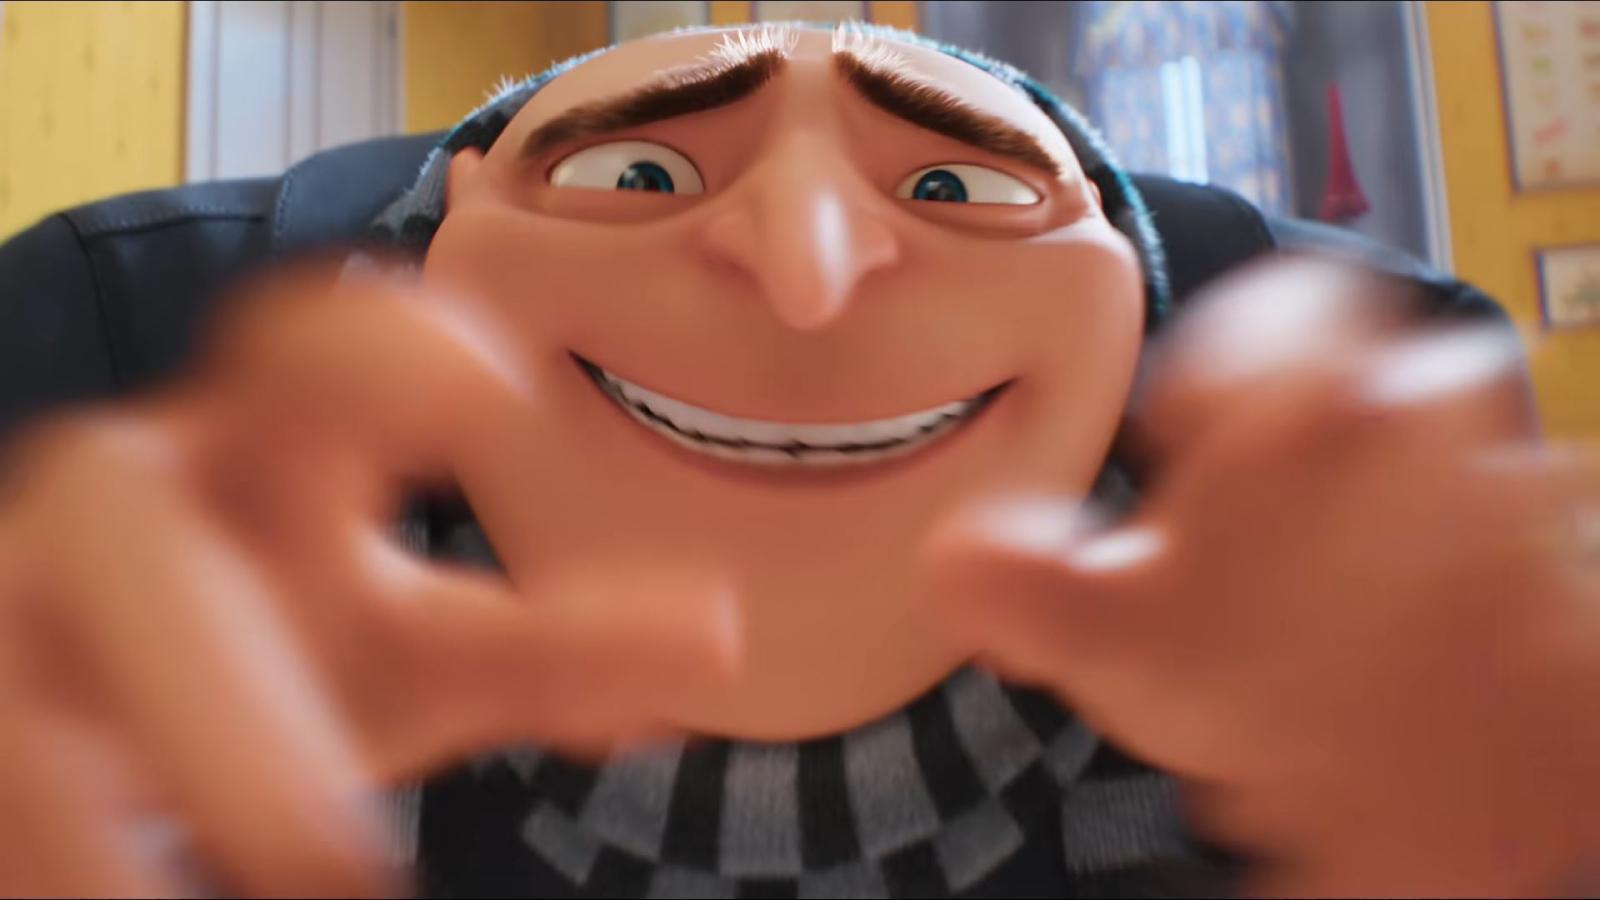 Despicable Me 4 Trailer with Gru